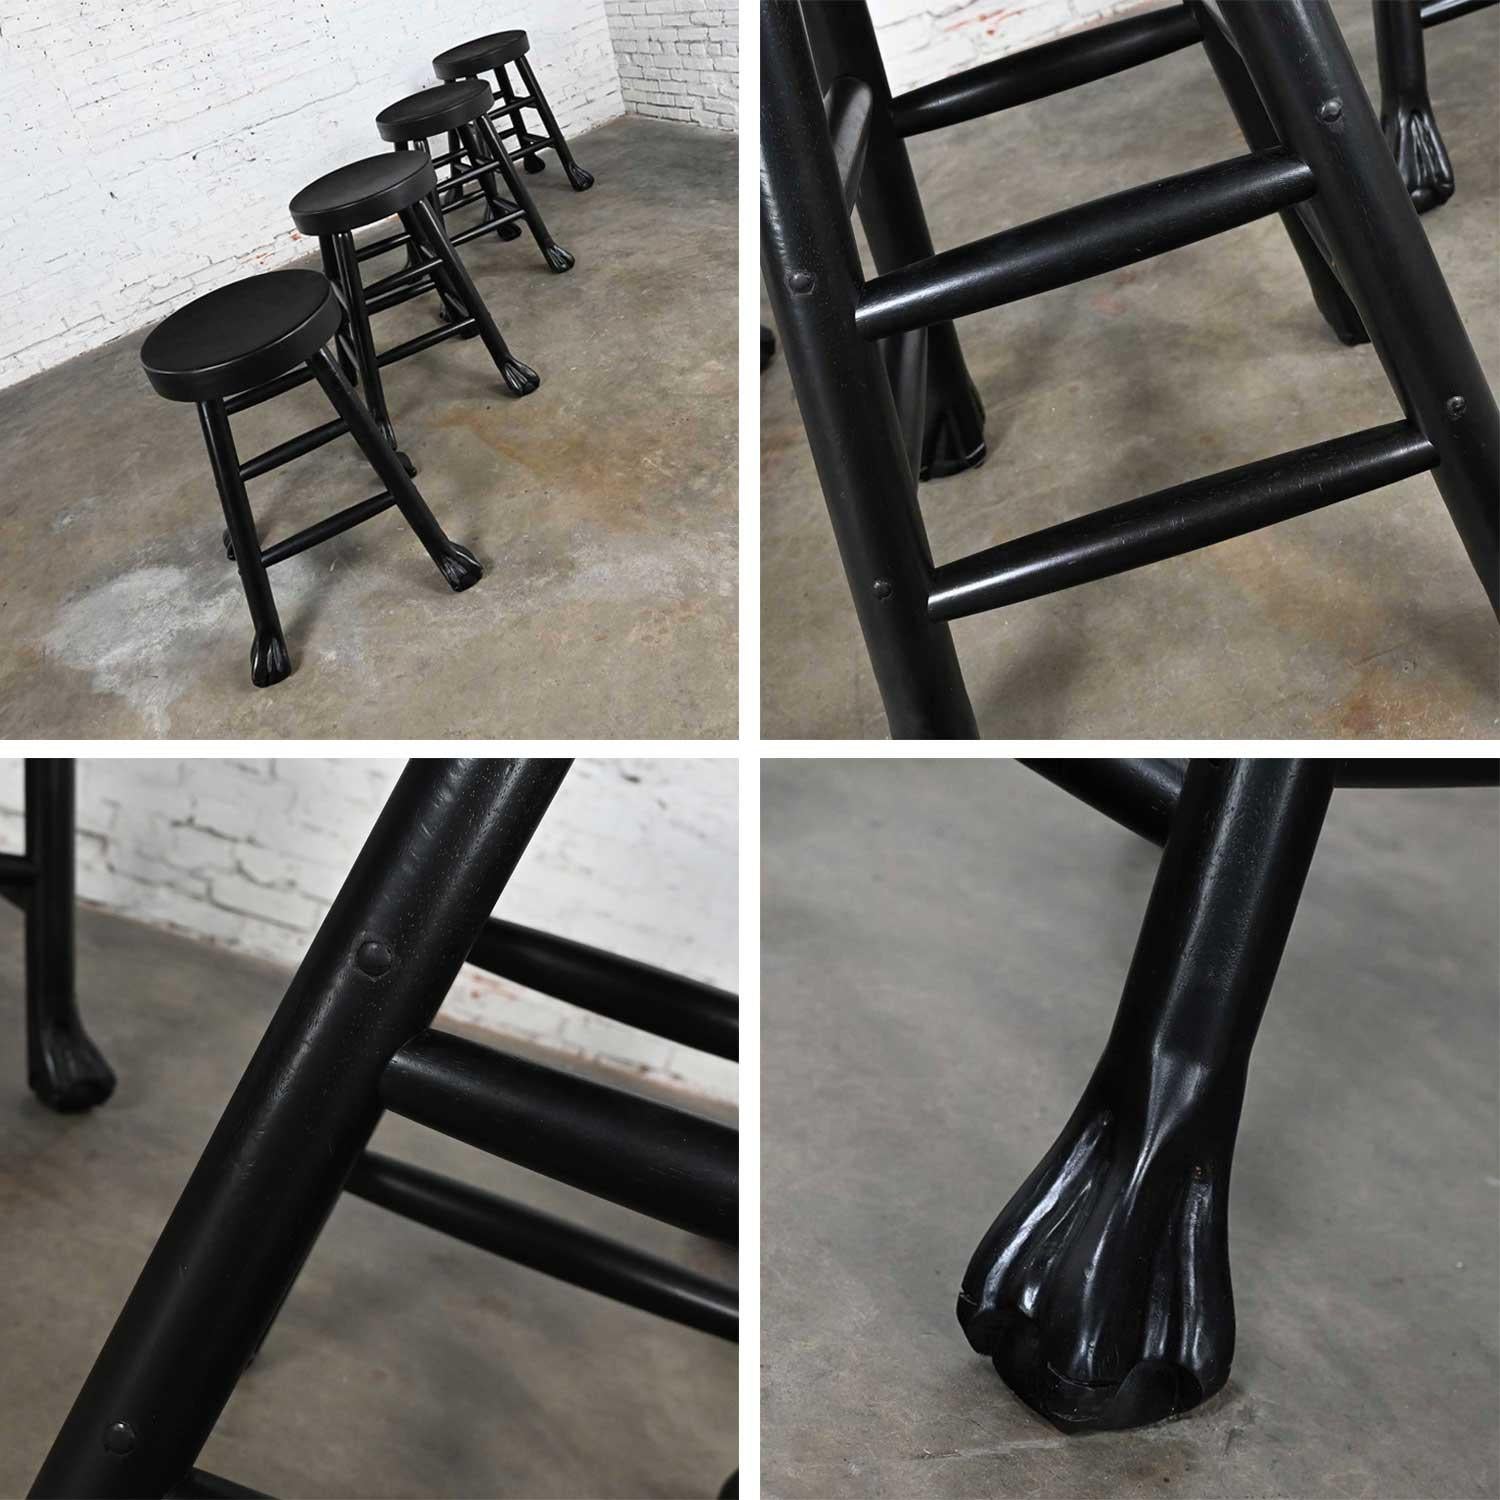 Vintage Rustic Blackened Solid Hardwood Chunky Claw Foot Barstools Set of 4 For Sale 4